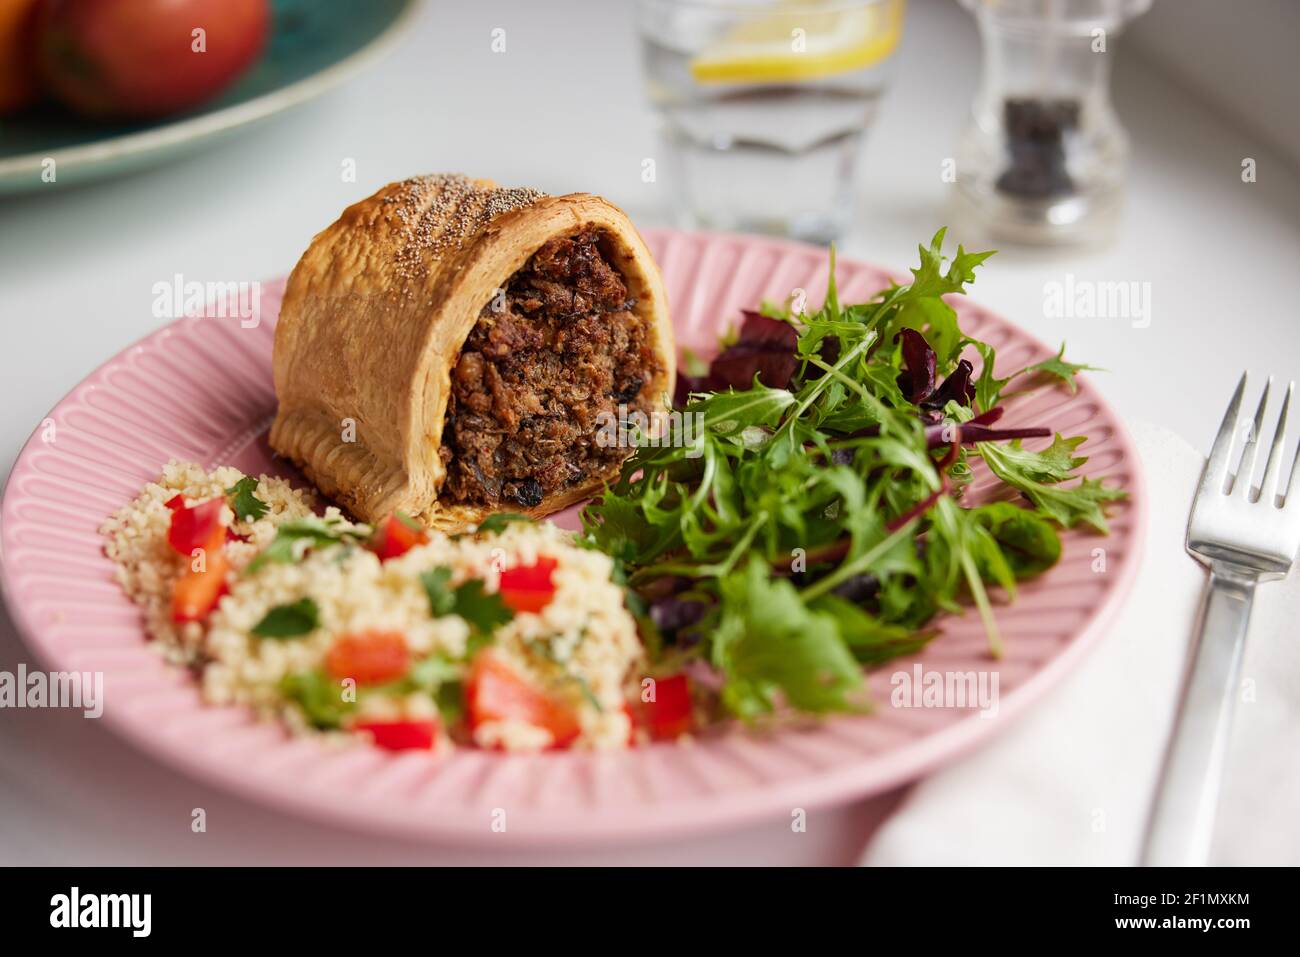 Vegan Meal On Plate With Savoury Roll Filled With Chickpea Lentil And Mushroom Next To Couscous And Salad Stock Photo